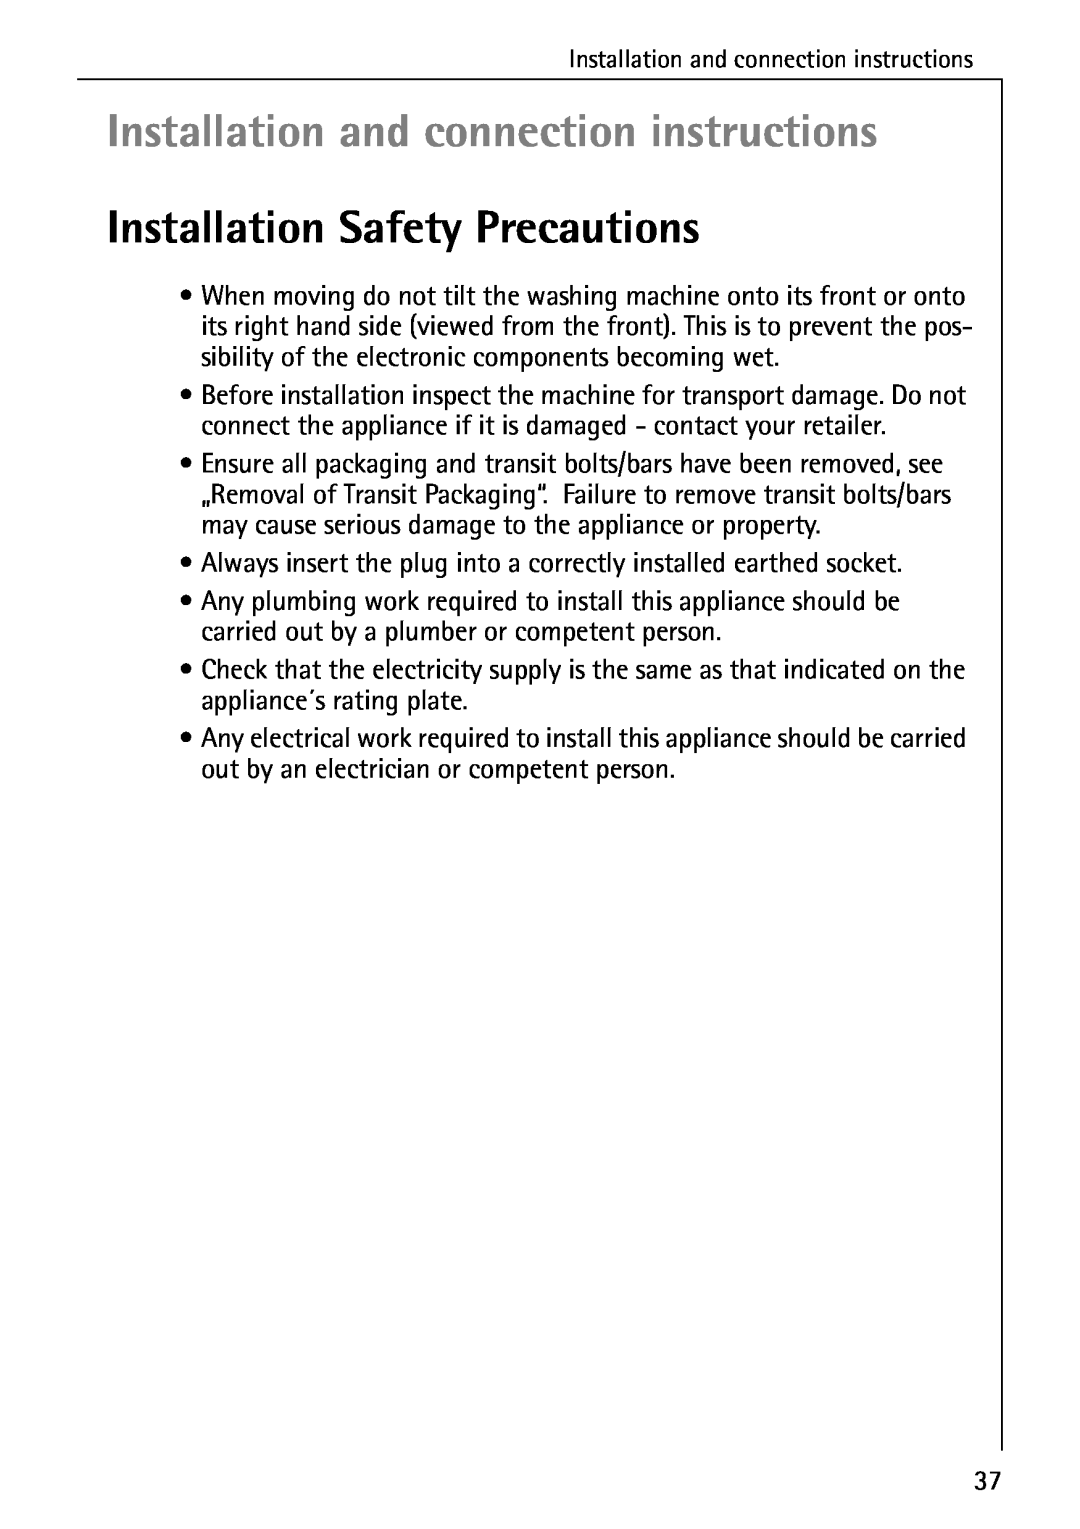 Electrolux LAVAMAT W 1259 manual Installation and connection instructions, Installation Safety Precautions 